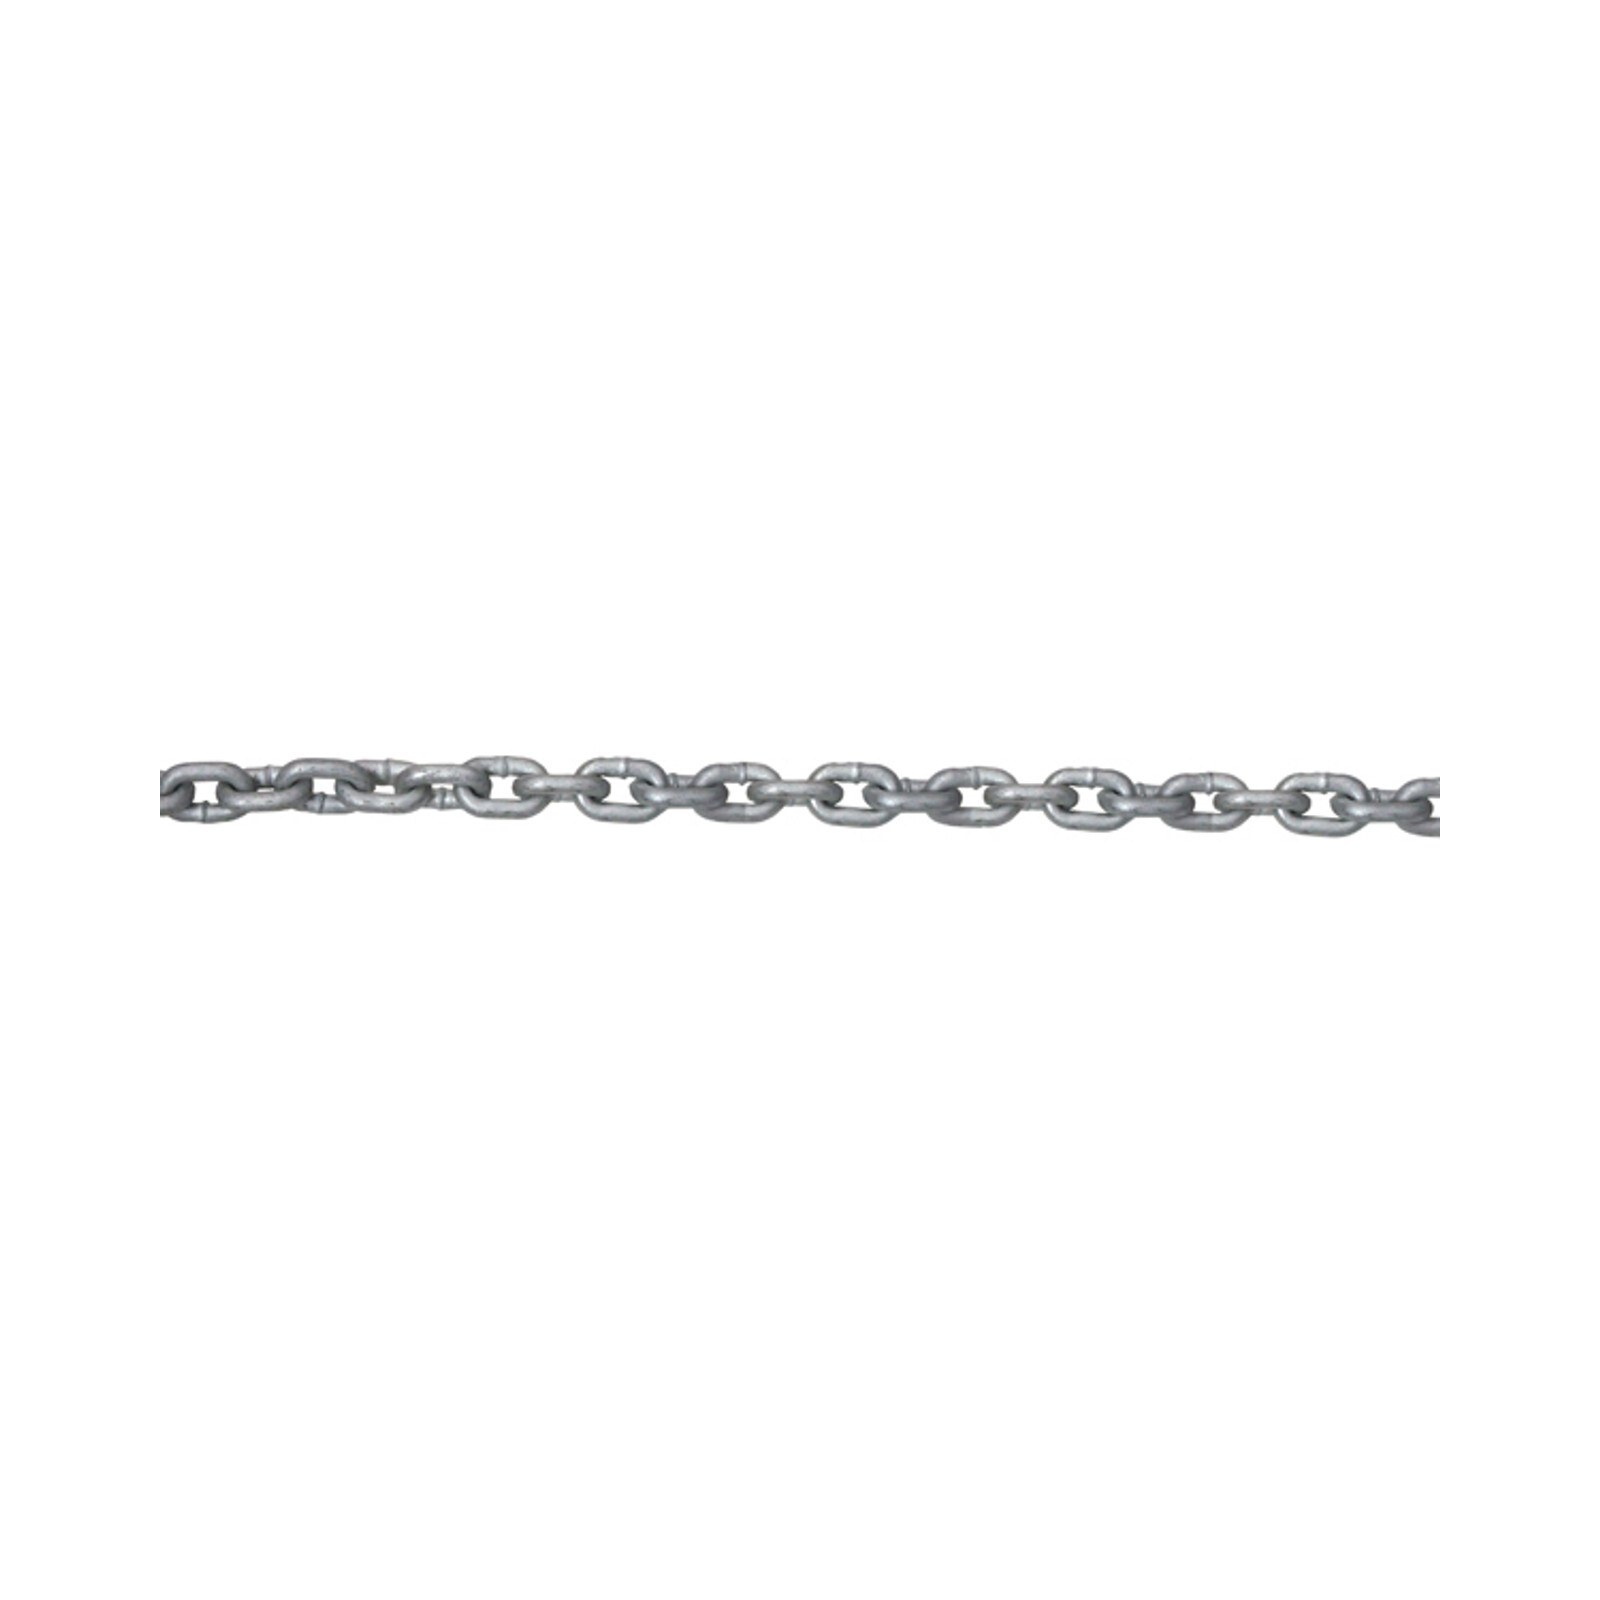 60mtr Pail of 6mm Galvanized Short-Link Anchor chain